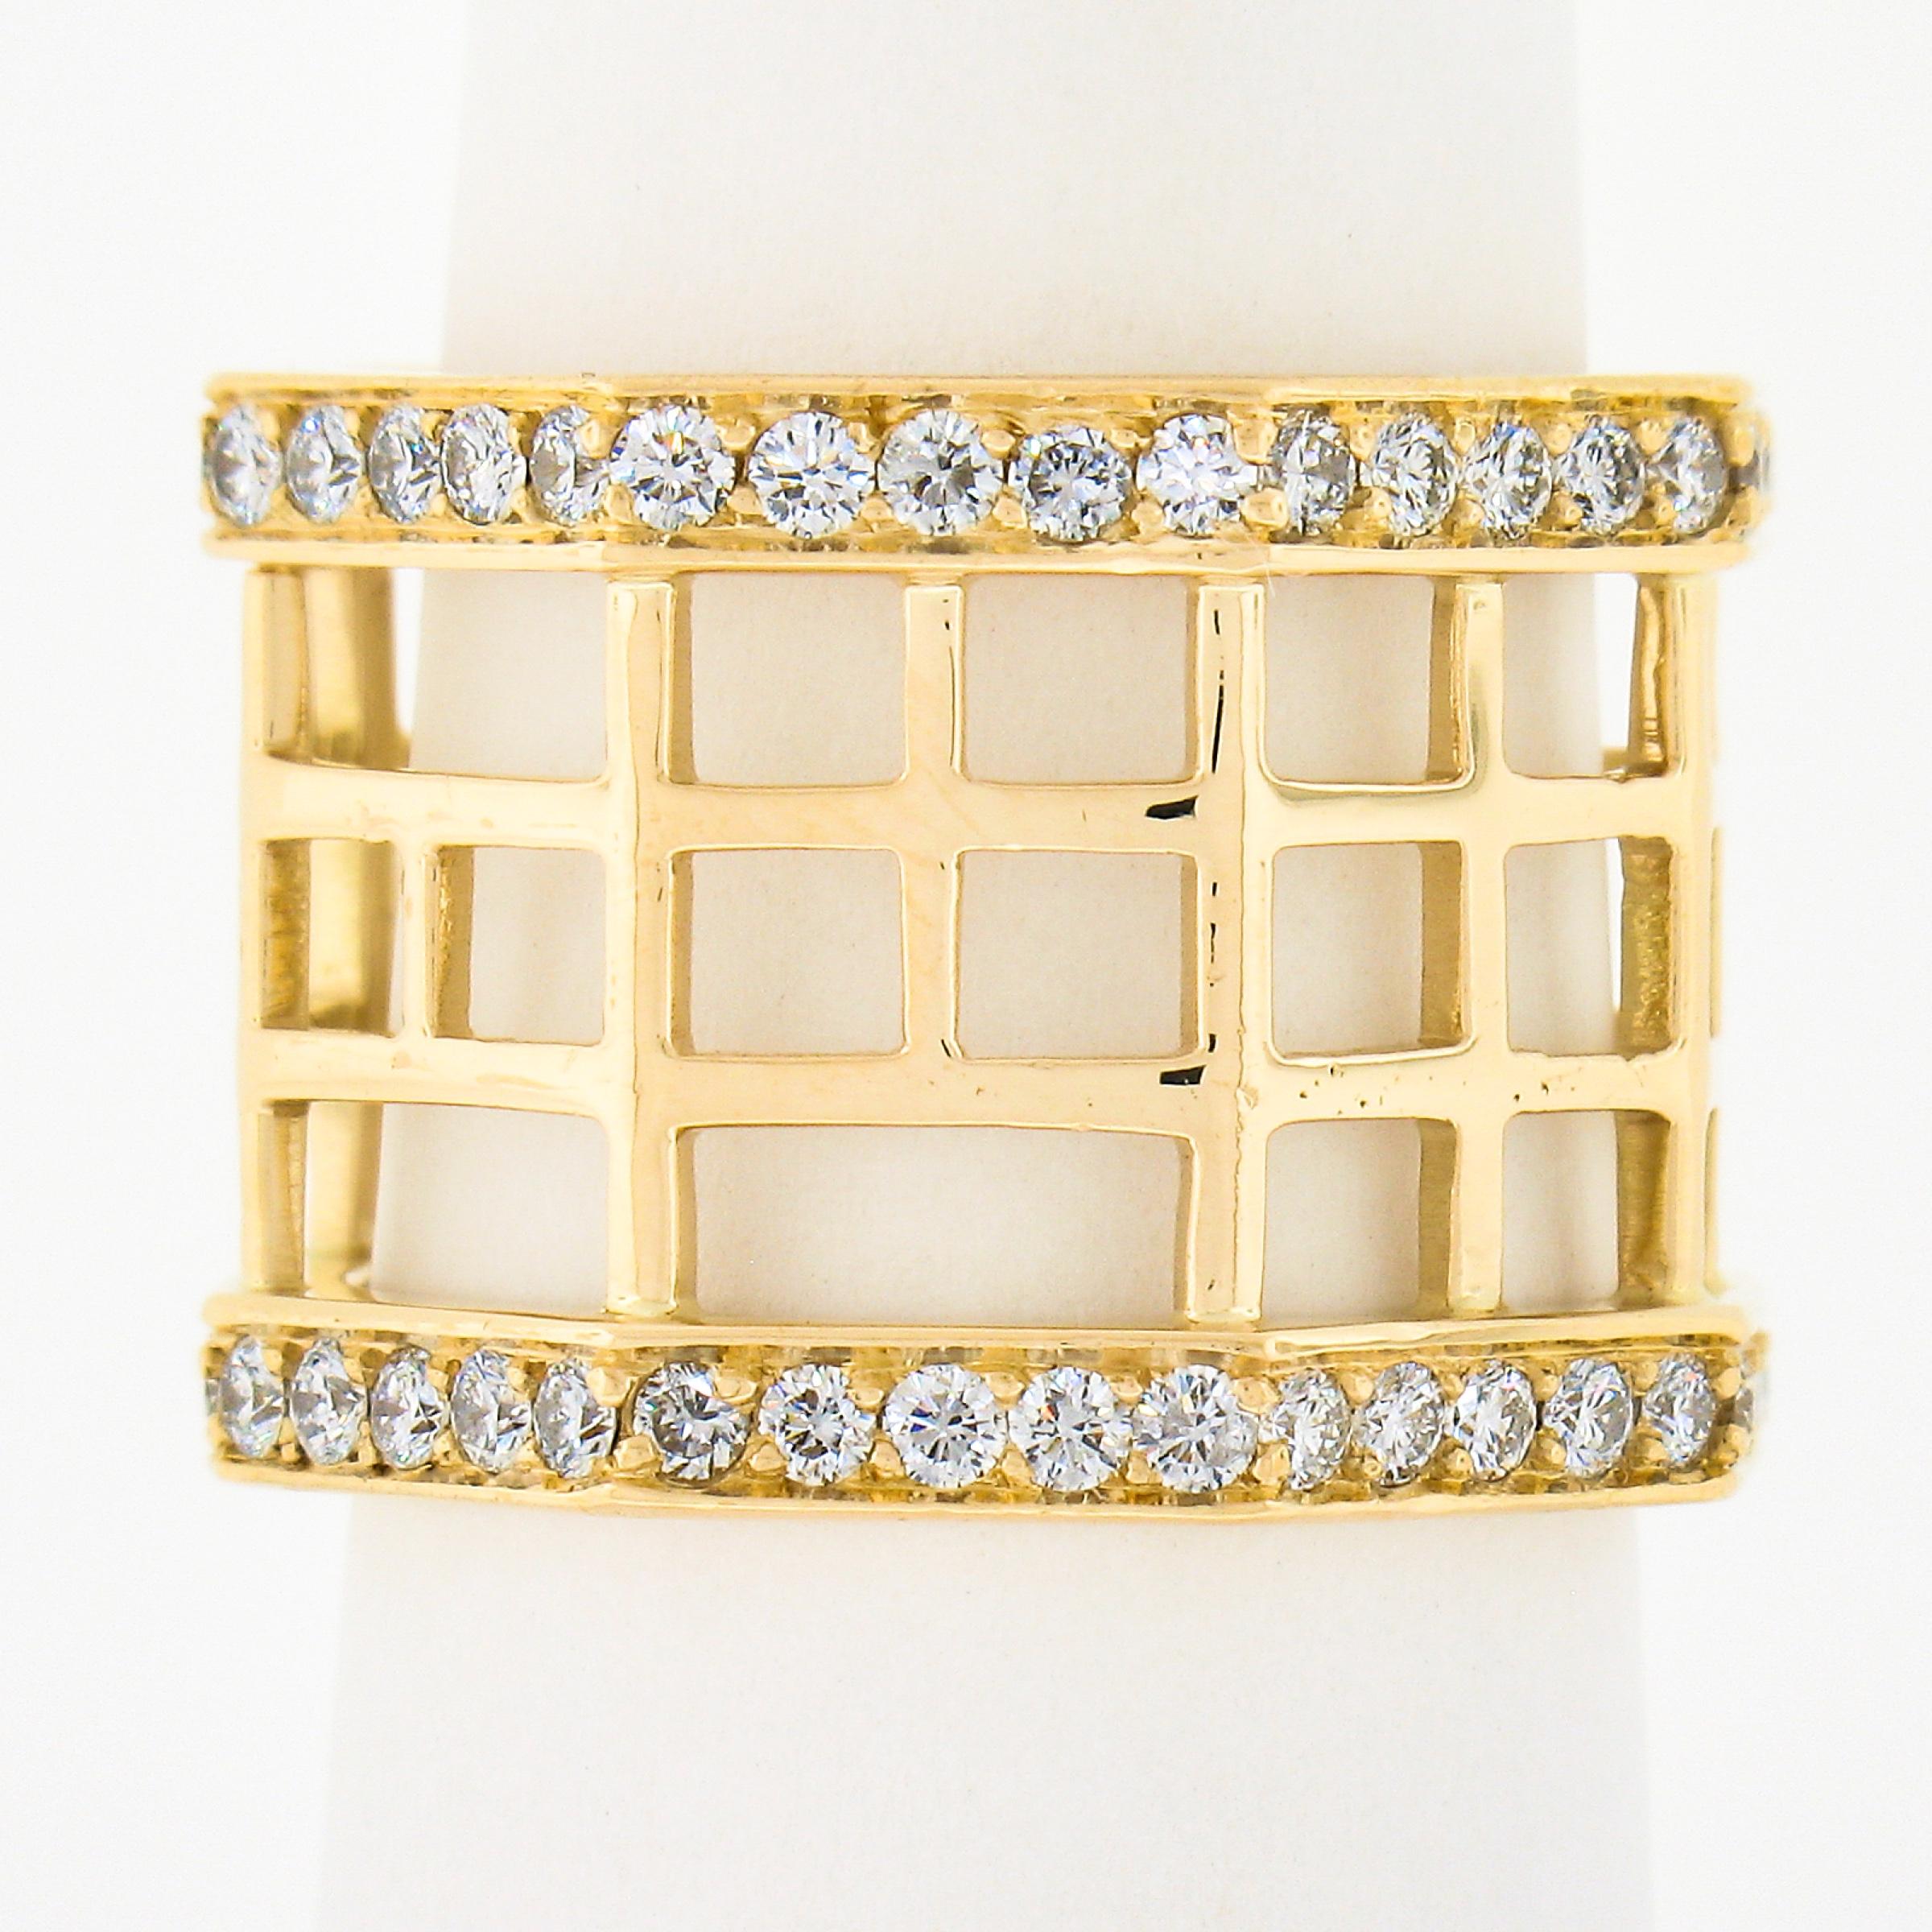 This gorgeous wide band ring is crafted in solid 18k yellow gold and features  beautiful open geometric design throughout the center section while he sides are covered with round brilliant cut diamonds neatly pave set, totaling approximately 1.40